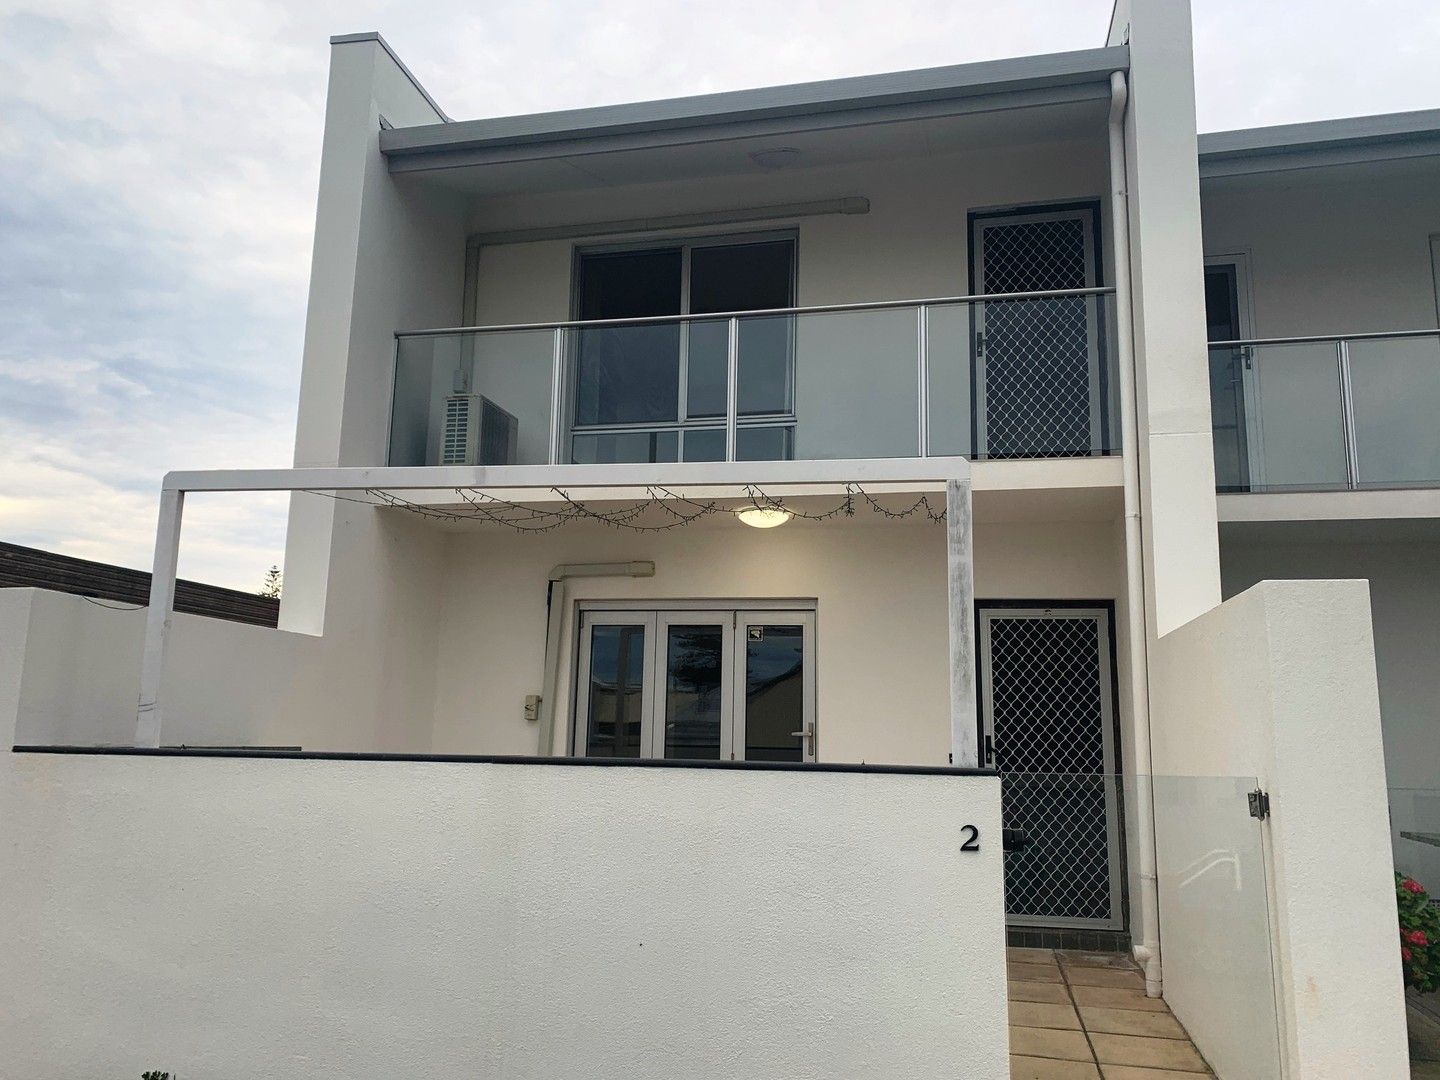 2 bedrooms Townhouse in 2/316 Seaview Road HENLEY BEACH SA, 5022